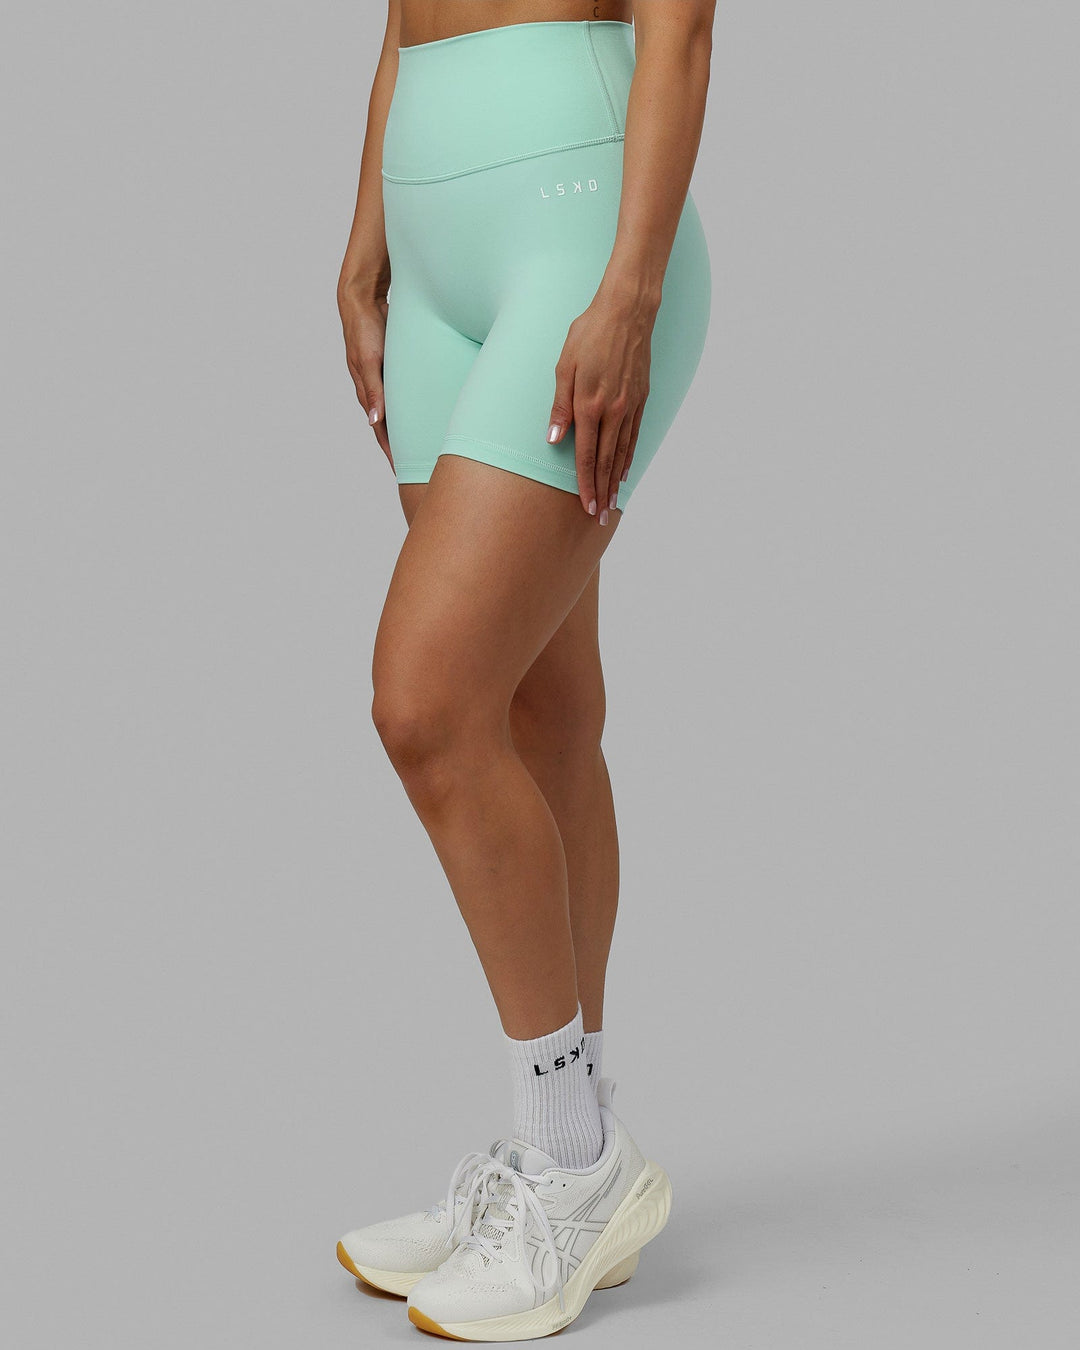 Woman wearing Base 2.0 Mid Short Tights - Pastel Turquoise